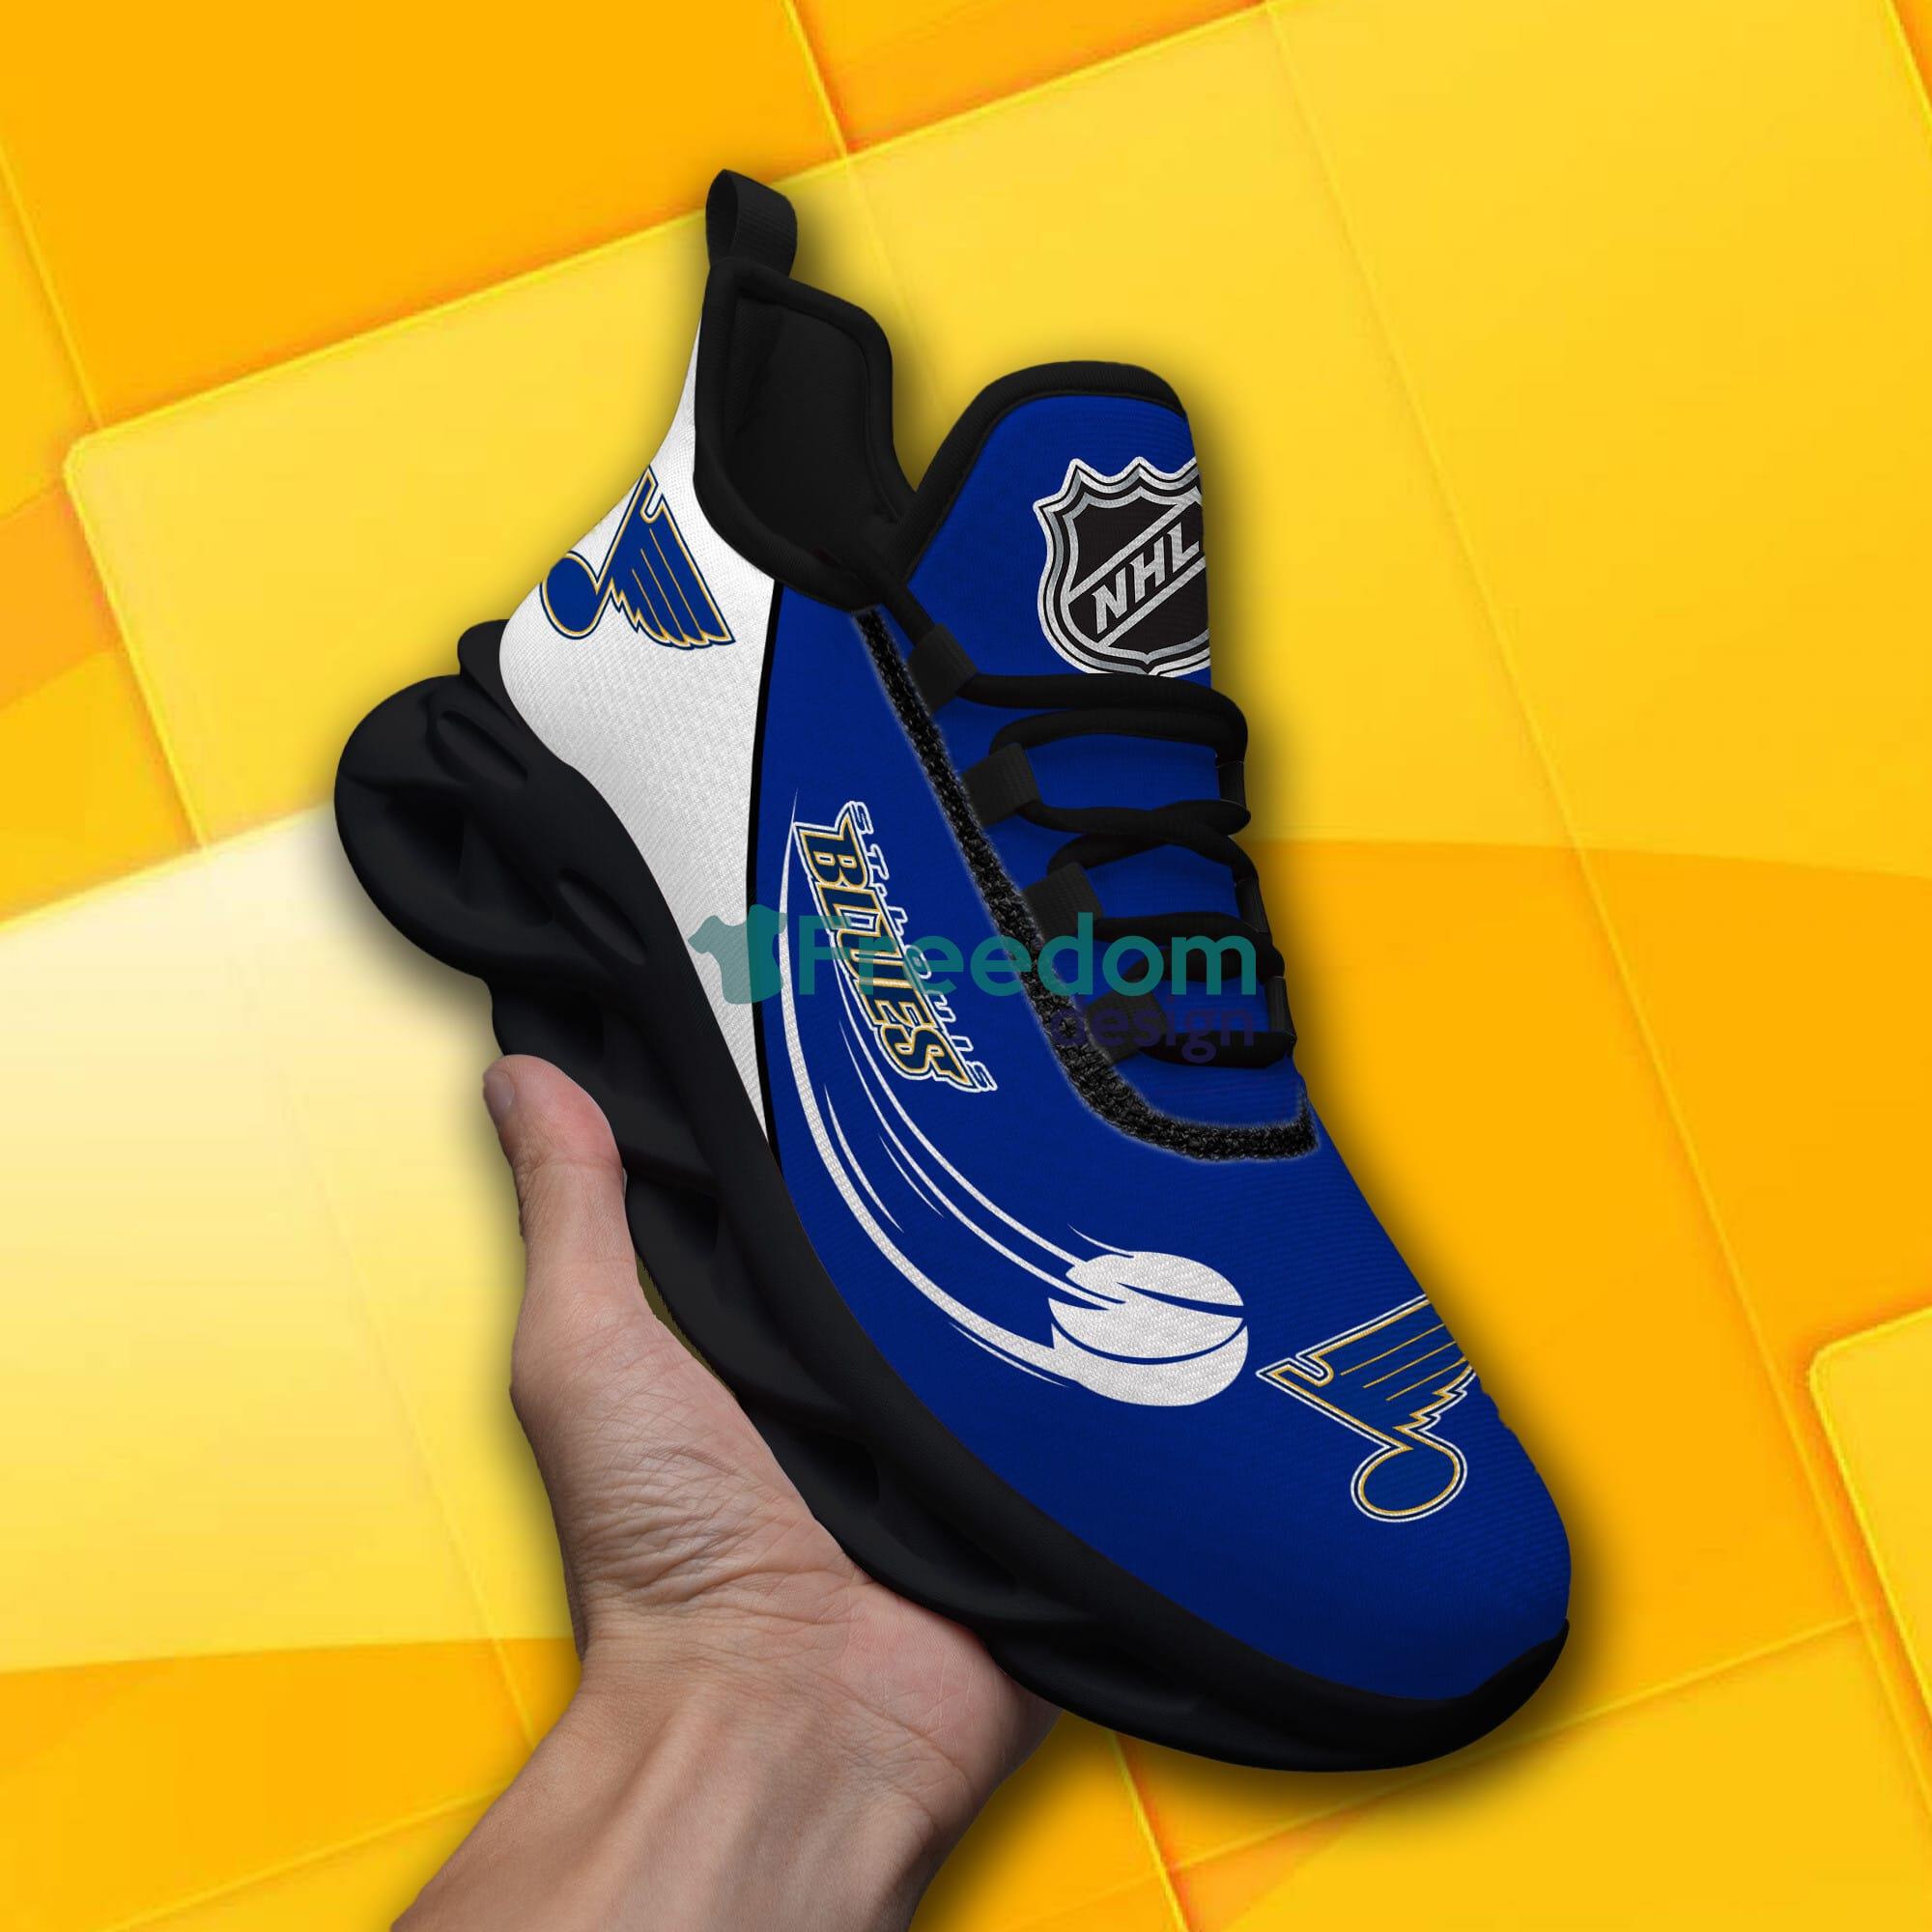 NHL St Louis Blues Running Shoes Design Max Soul Shoes Gift For